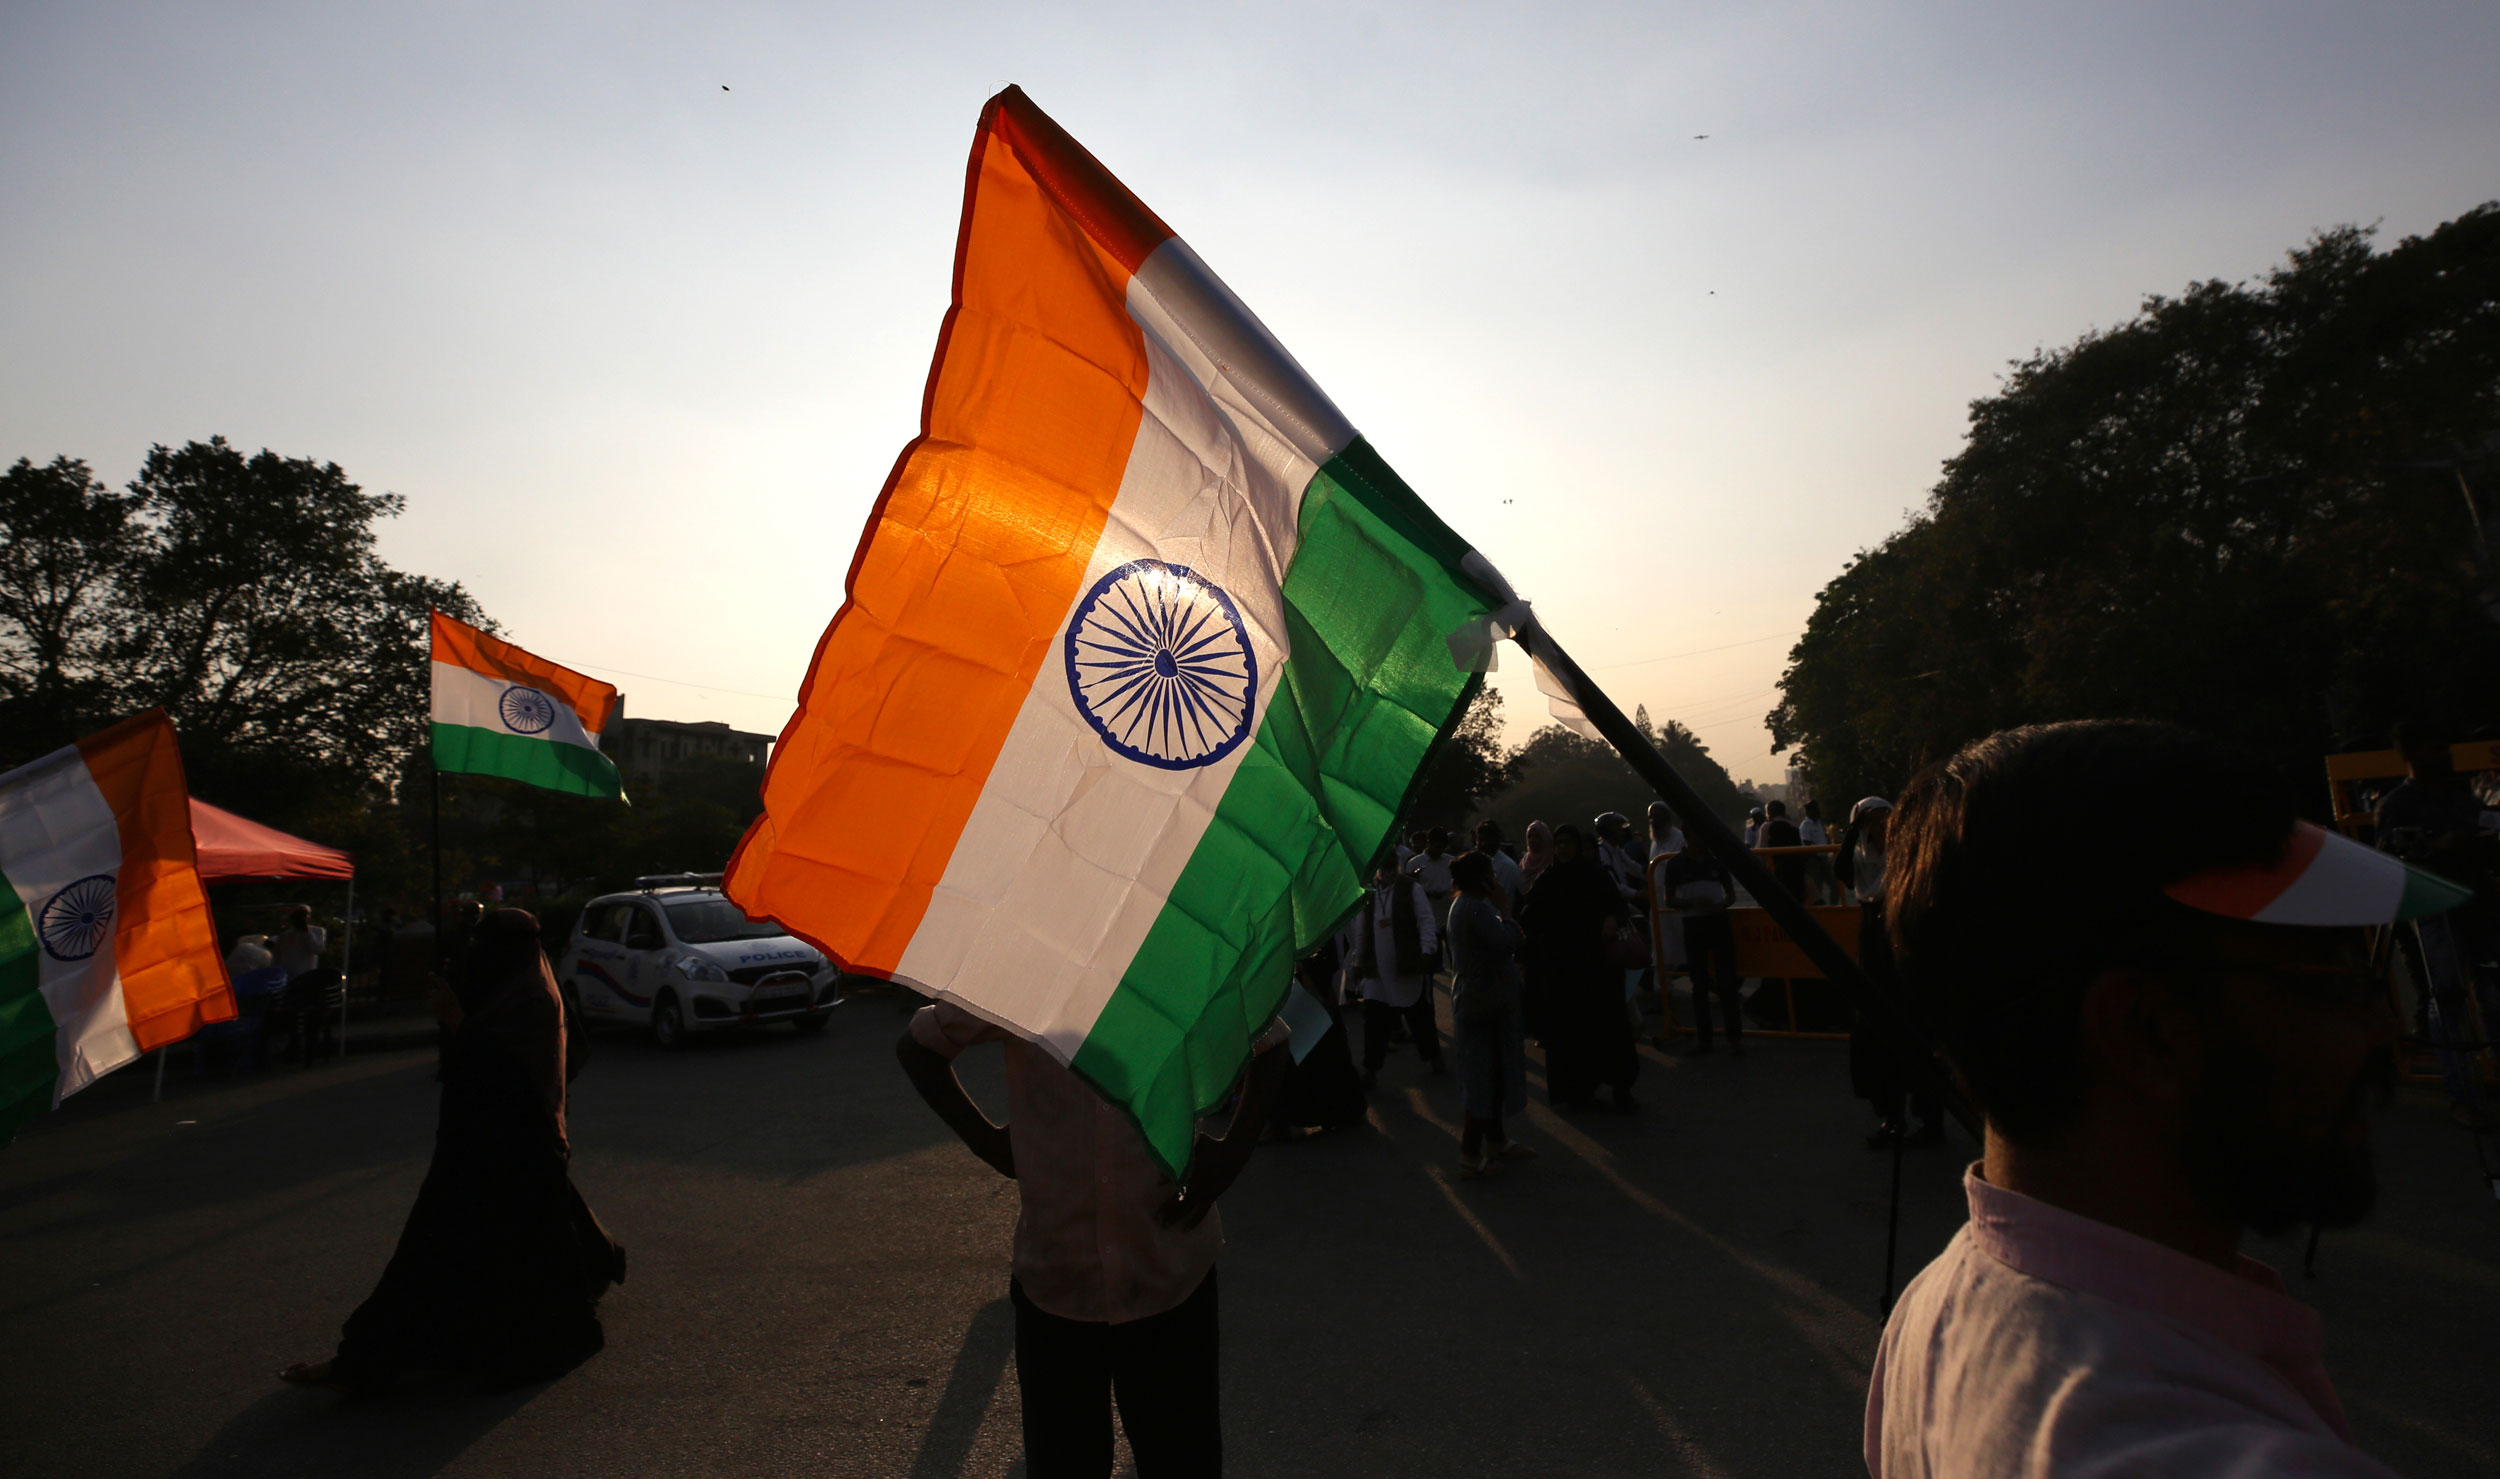 People carry national flags as they walk to join others to form a human chain to mark the death anniversary of Mahatma Gandhi and to protest the new citizenship act in Bangalore on Thursday.